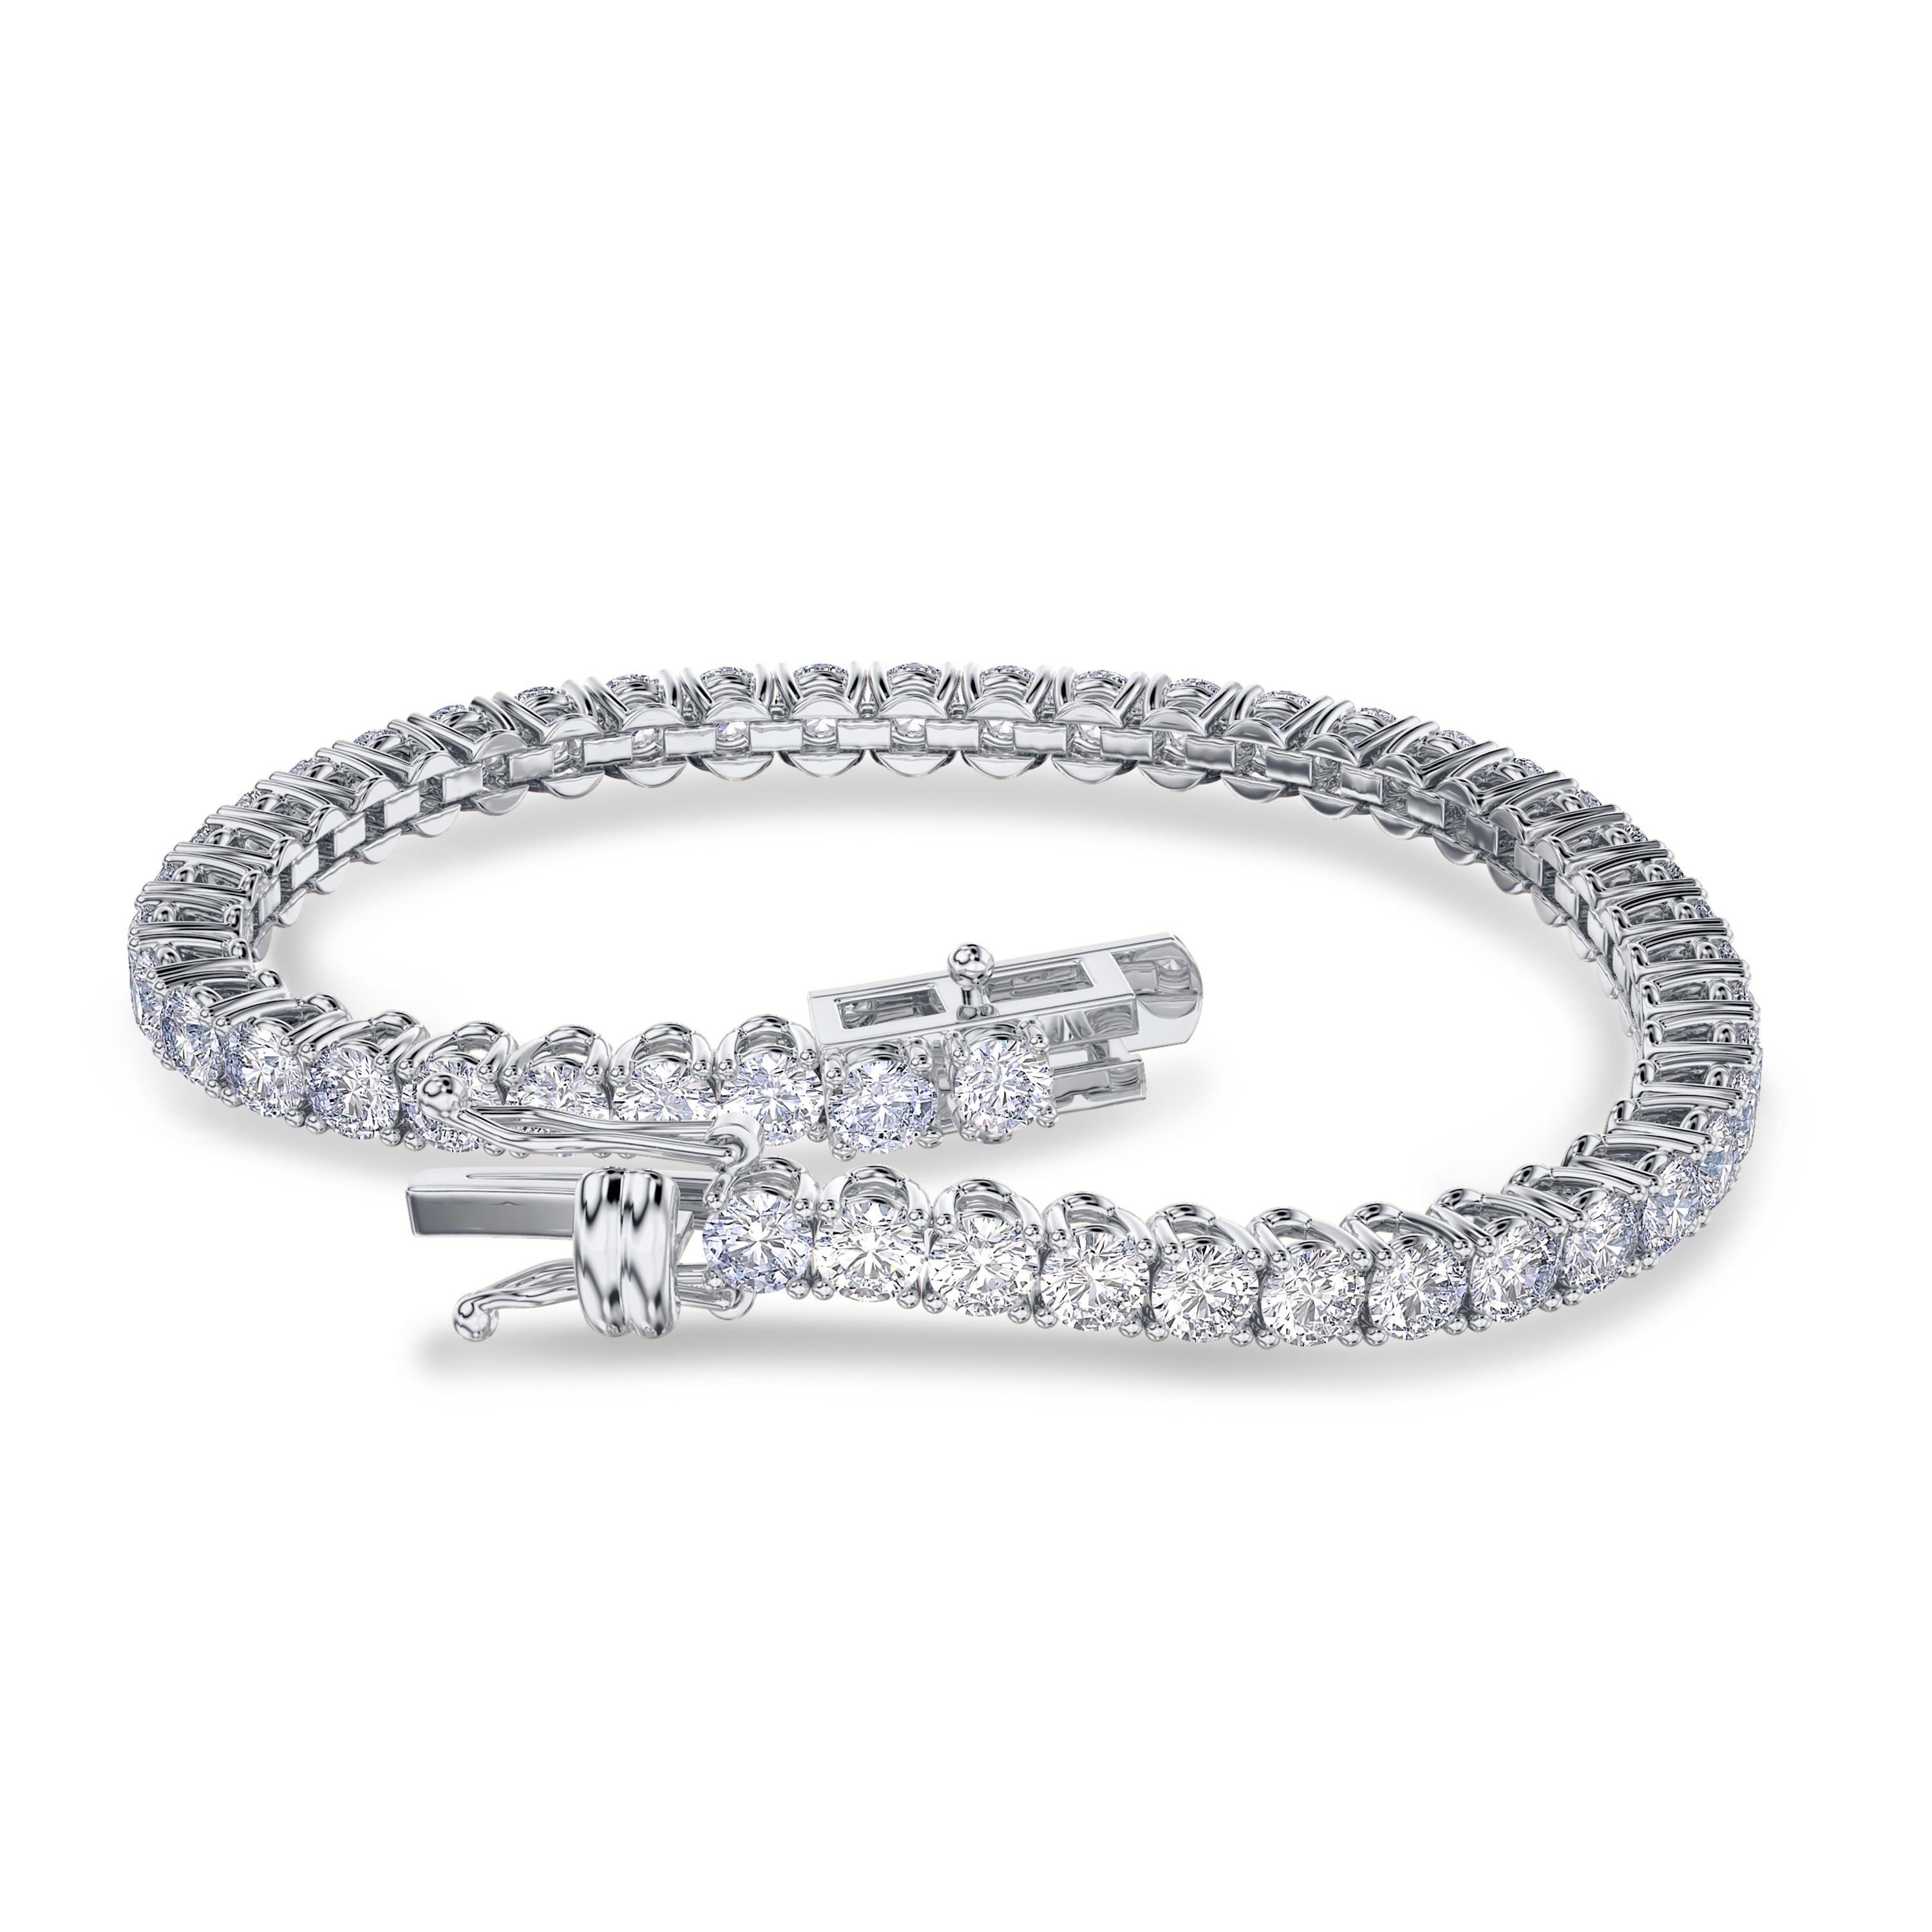 14.43 carat tennis bracelet in 18k gold, G-H color and SI clarity